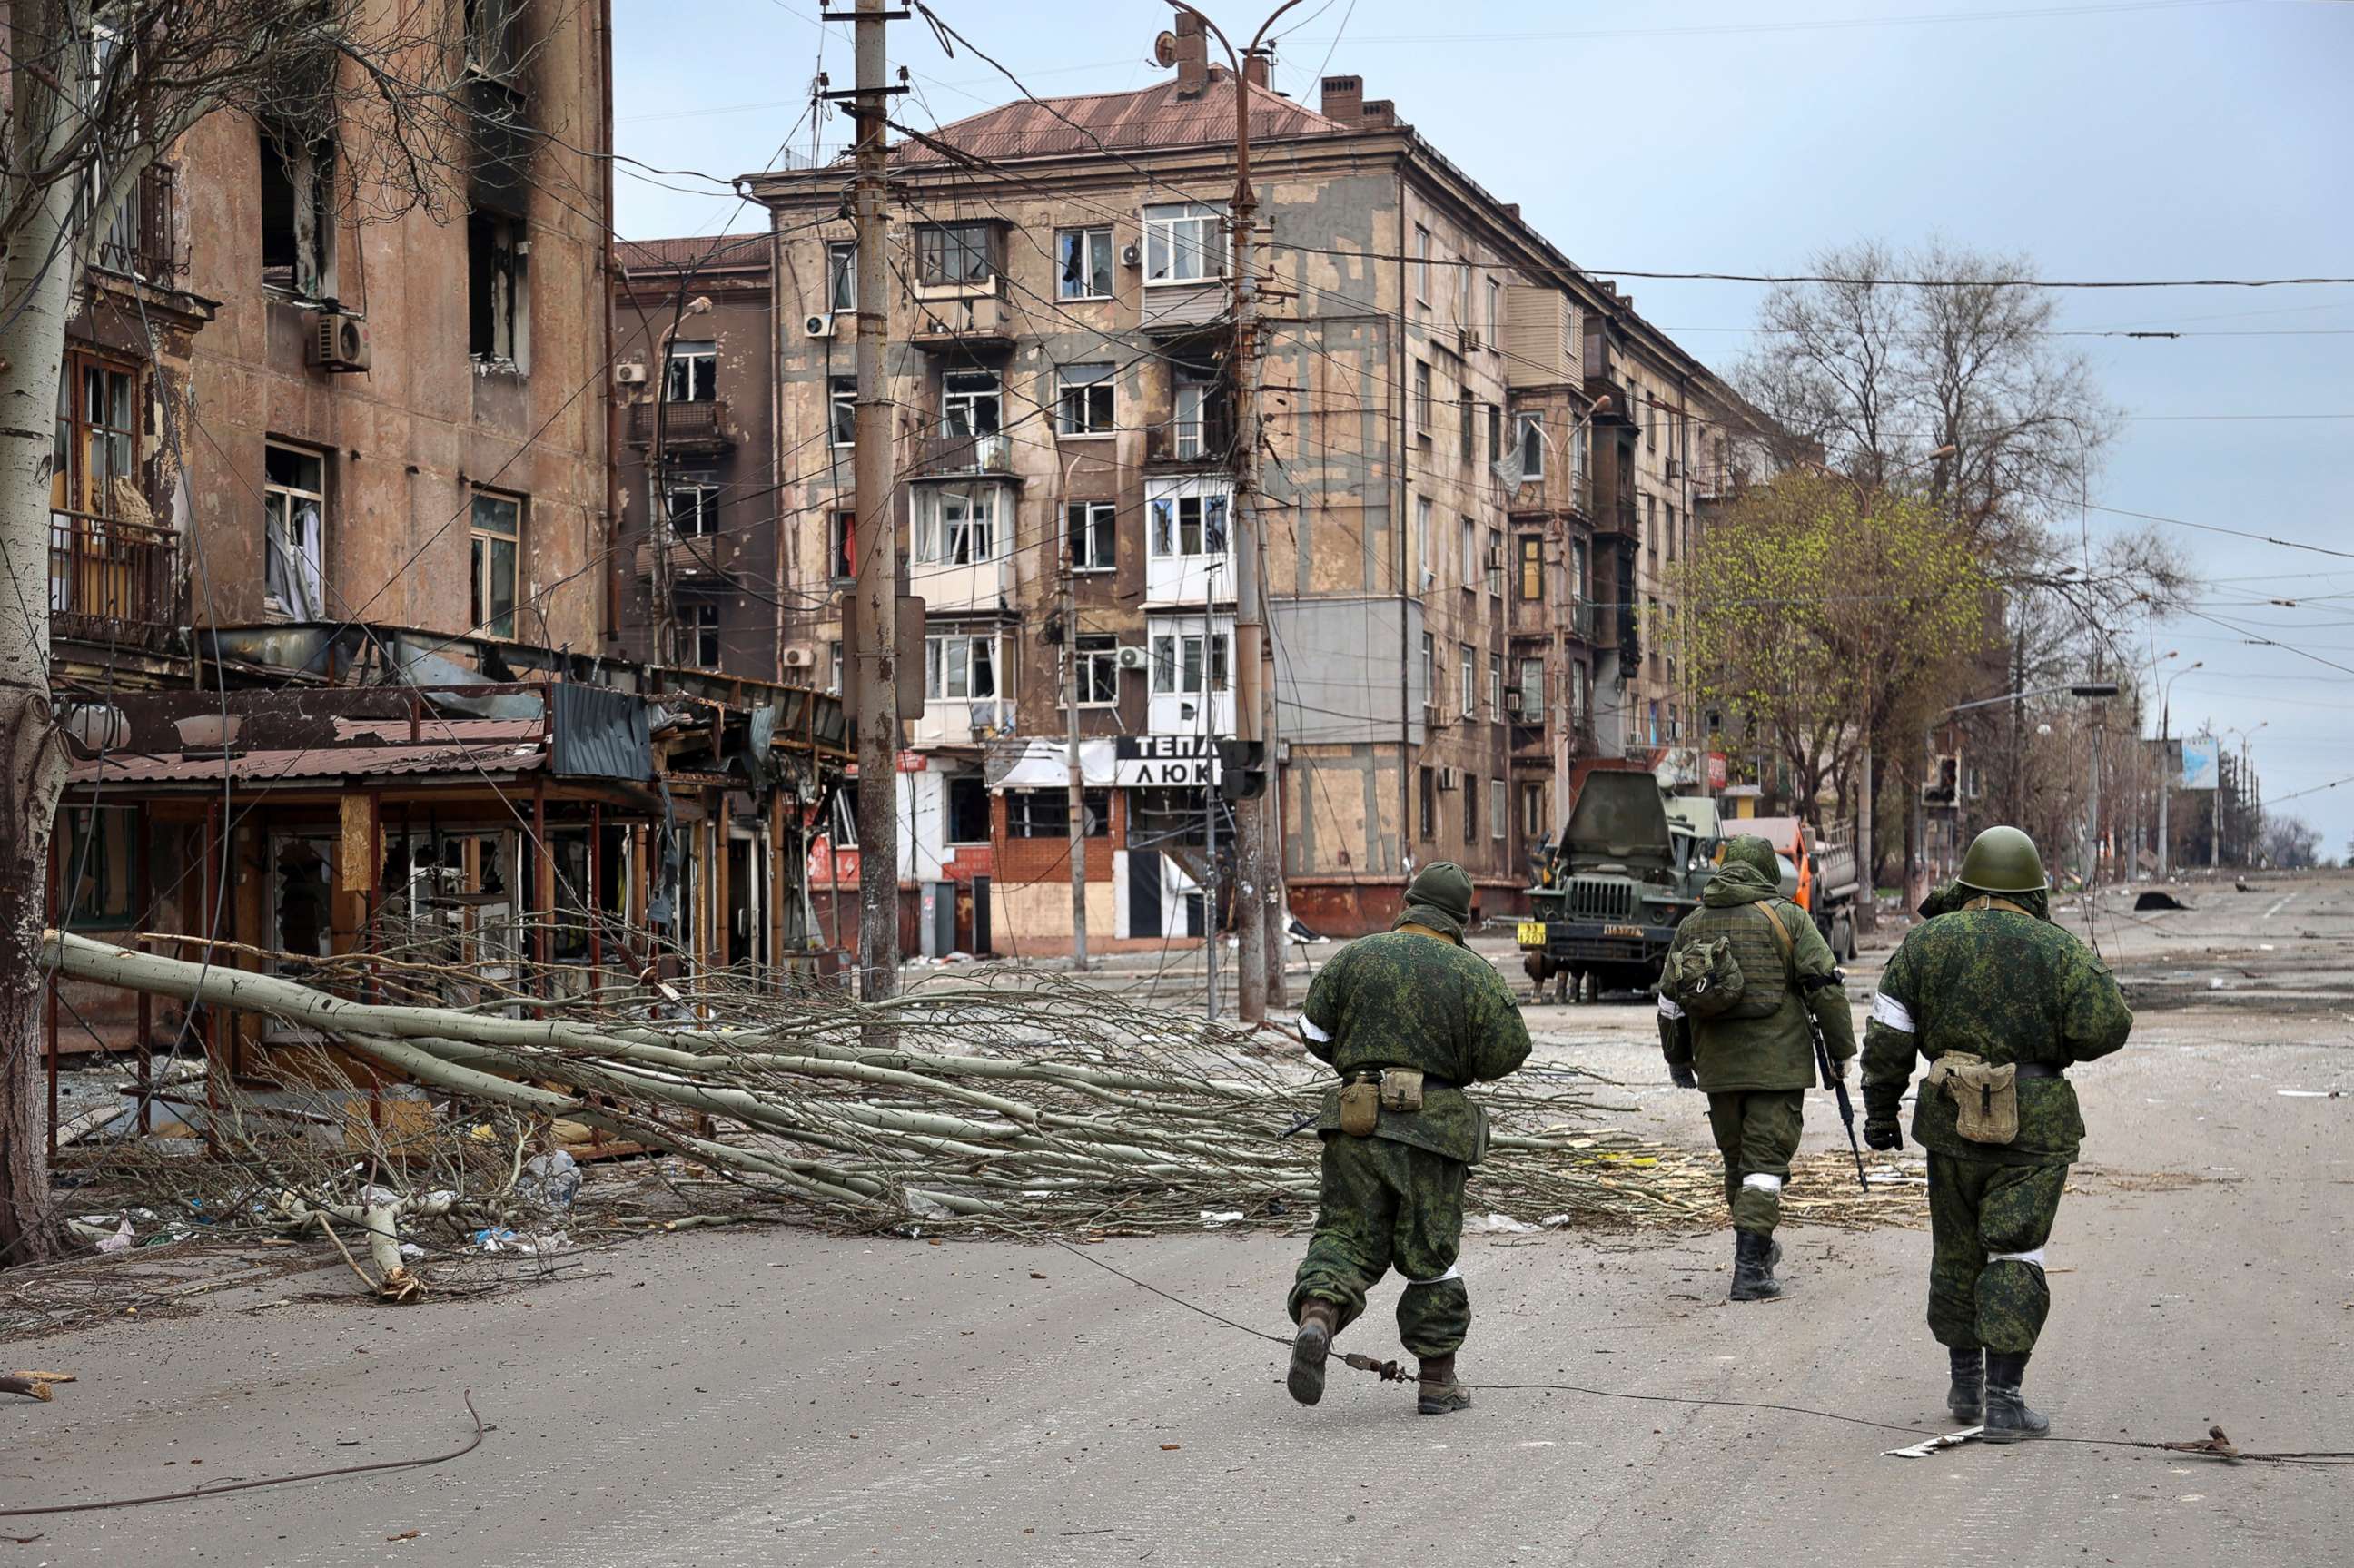 PHOTO: Servicemen of Donetsk People's Republic militia walk past damaged apartment buildings near the Illich Iron & Steel Works Metallurgical Plant, in an area controlled by Russian-backed separatist forces in Mariupol, Ukraine, April 16, 2022.